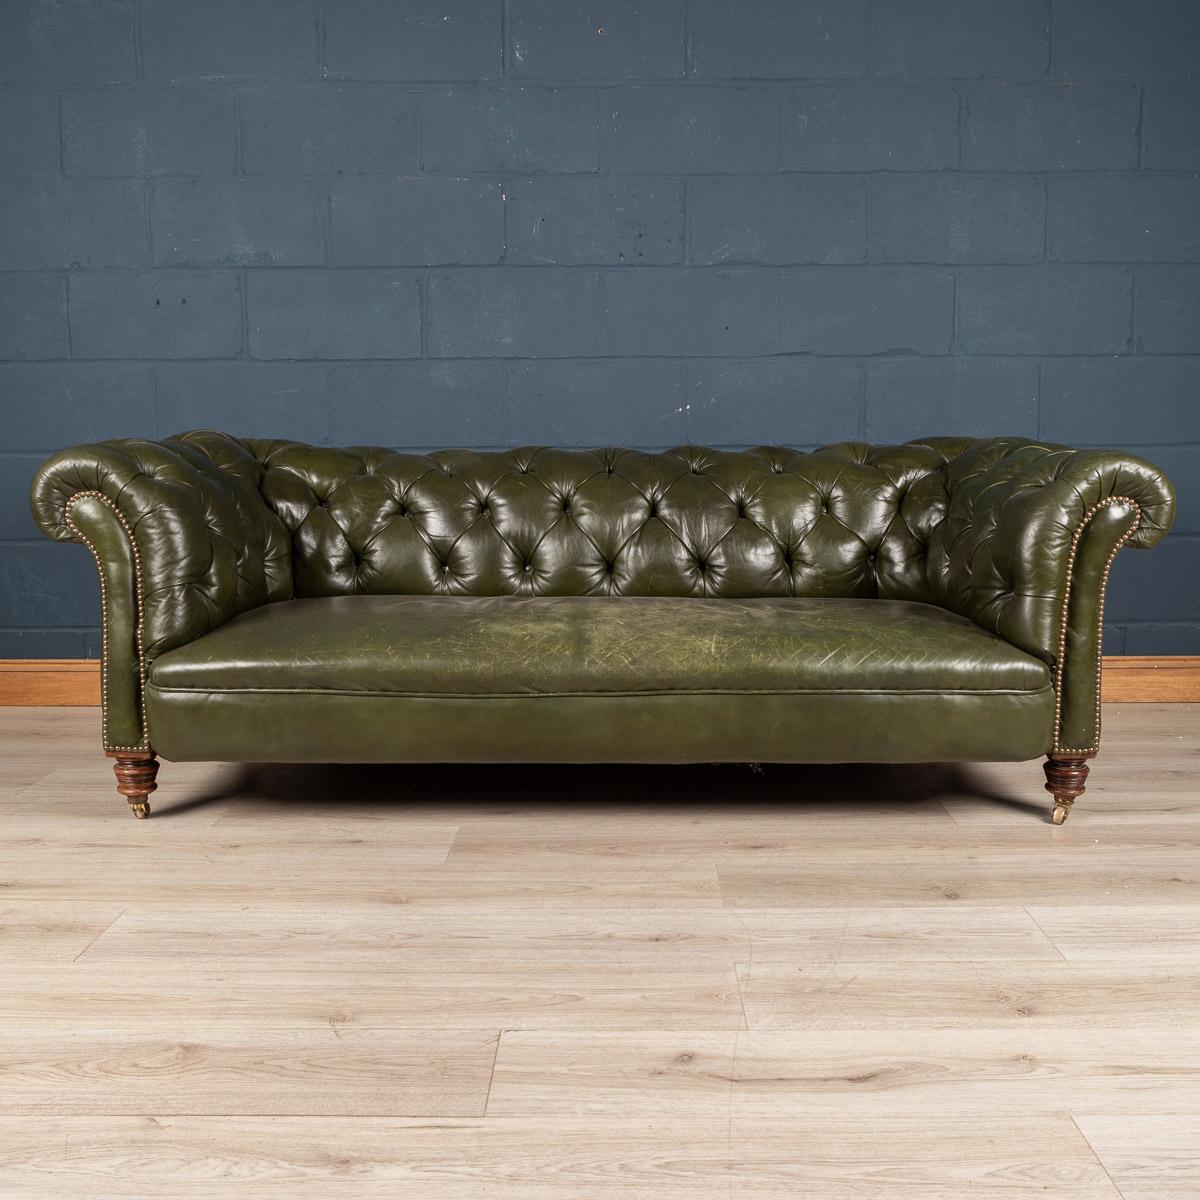 A traditional Victorian three seater leather chesterfield sofa. Lovely patina on the green leather, all hand crafted and on original brass castors. it is of the finest quality and oozes charm and style. Perfect for any interior, both modern and